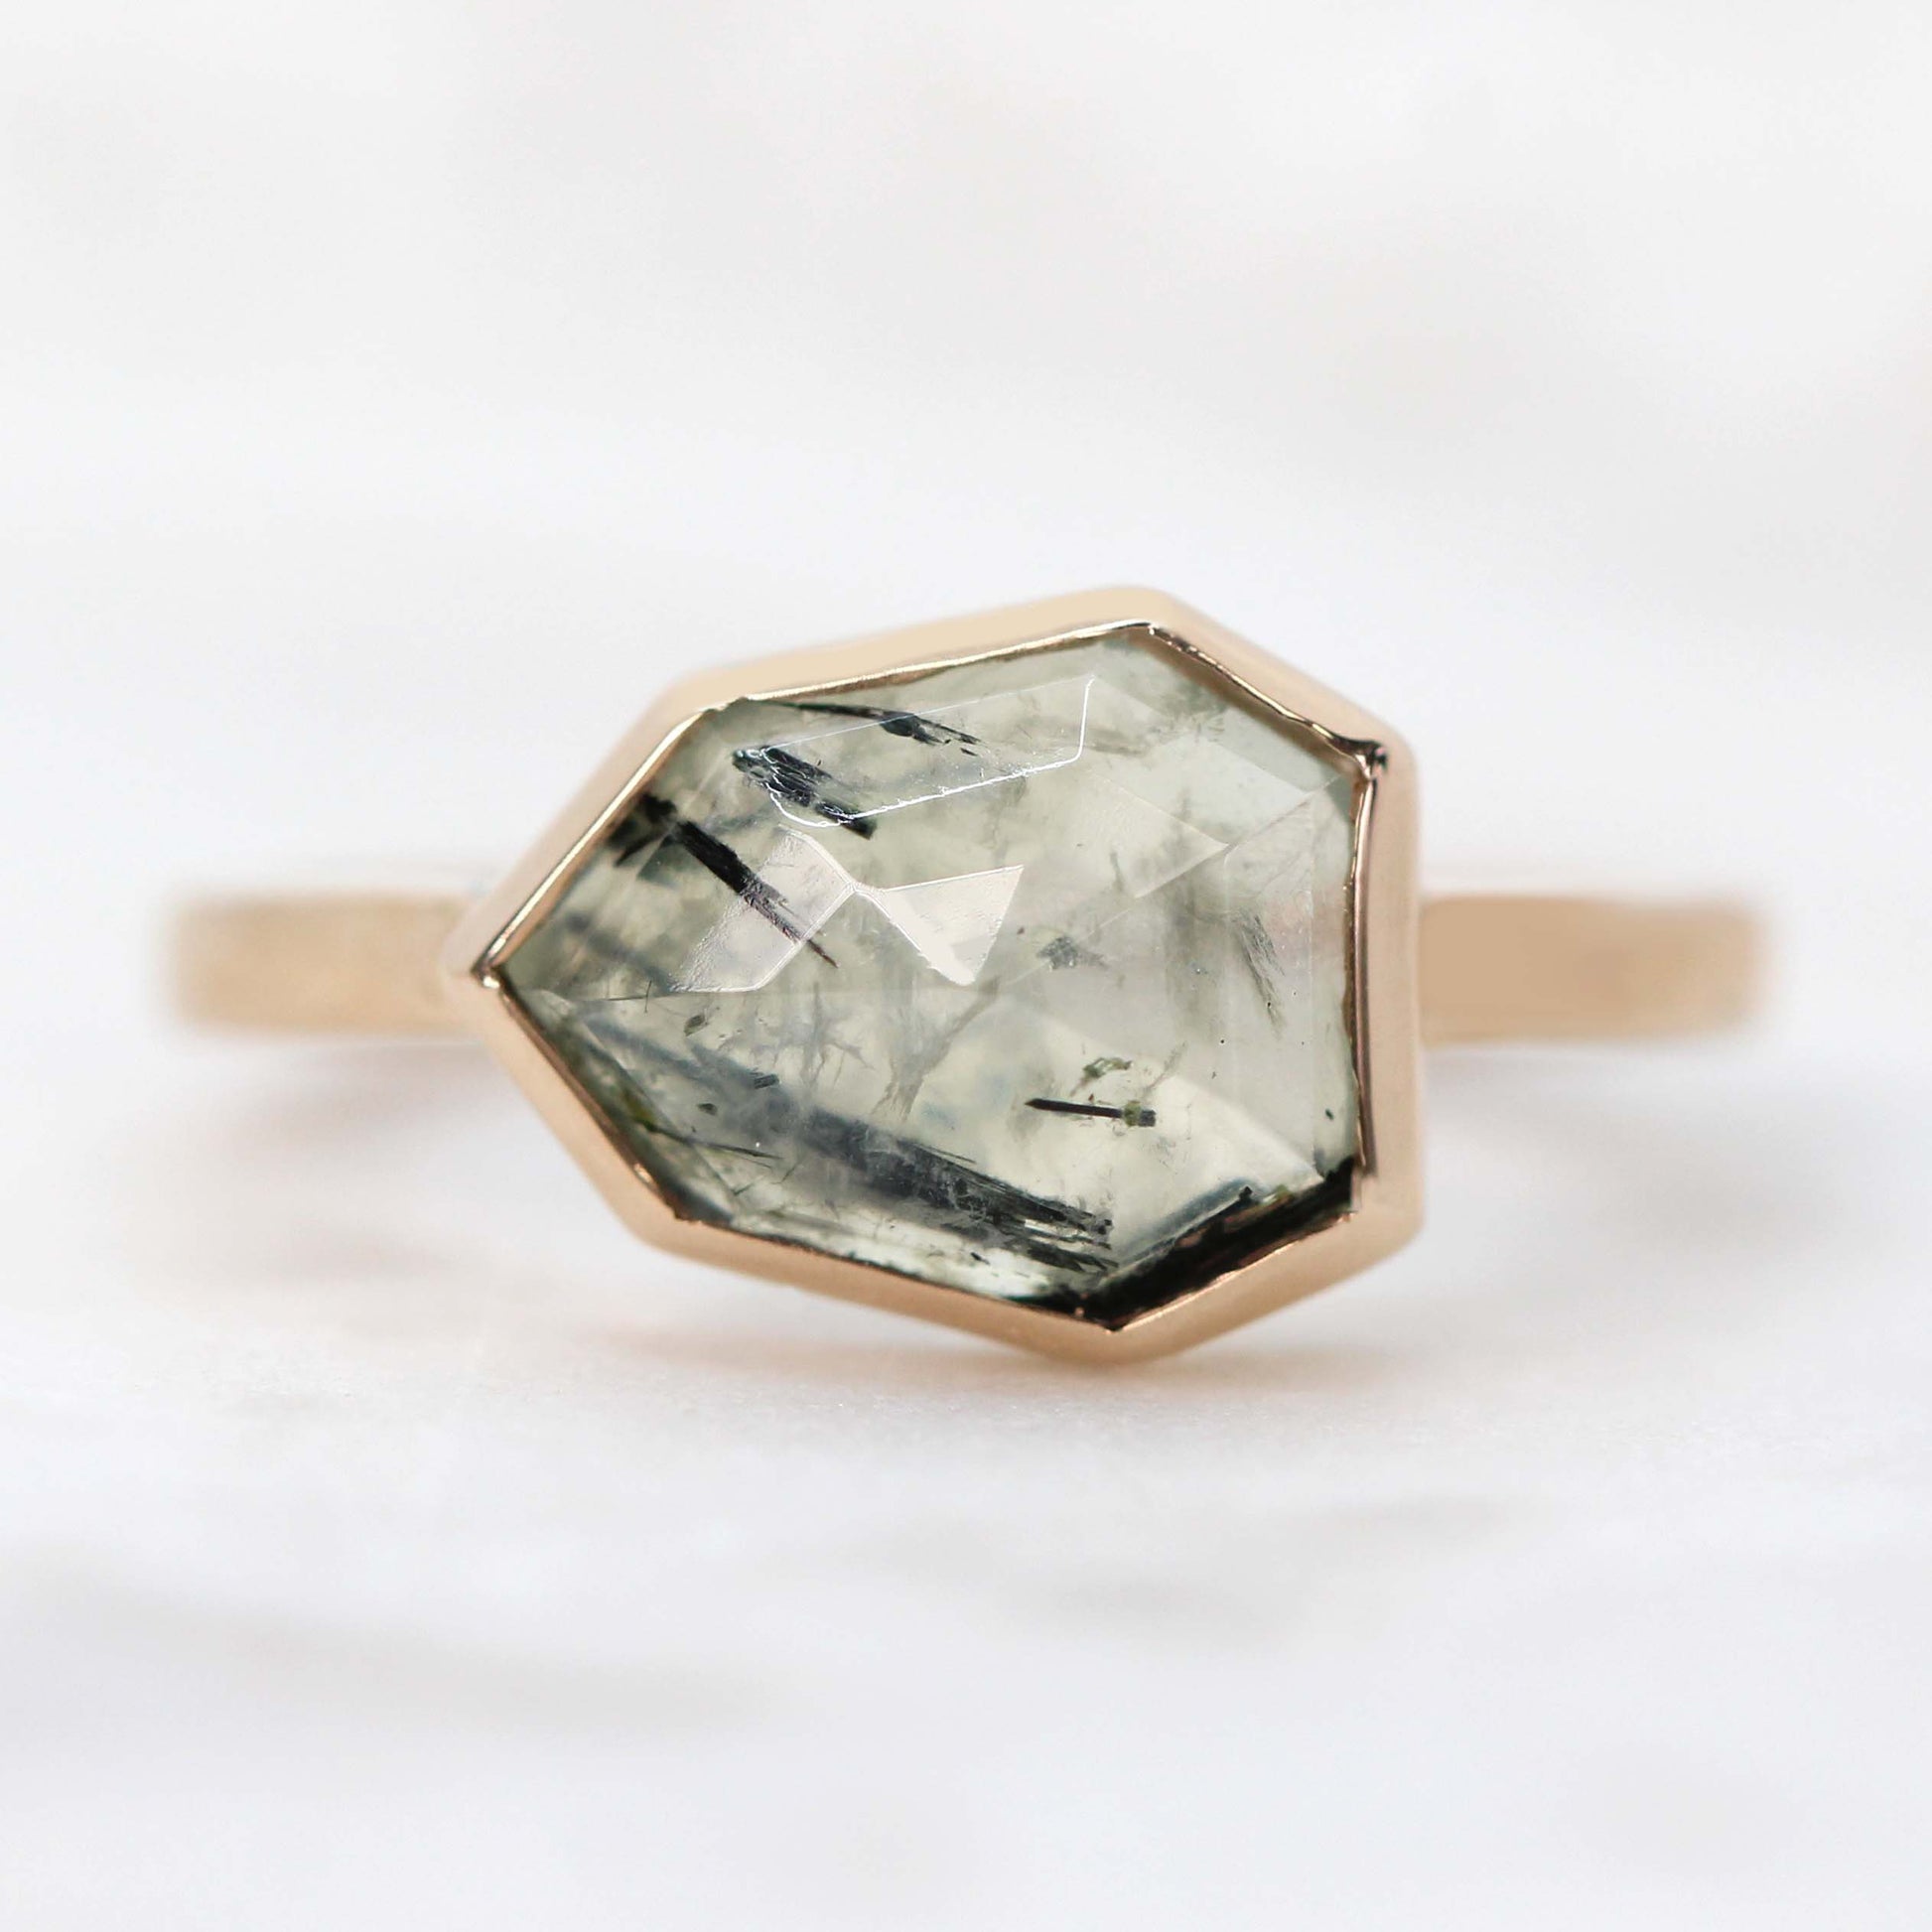 Matti Ring - Your Choice of Rutilated Prehnite in 14K Rose, Yellow, or White Gold. Custom made to order. - Midwinter Co. Alternative Bridal Rings and Modern Fine Jewelry